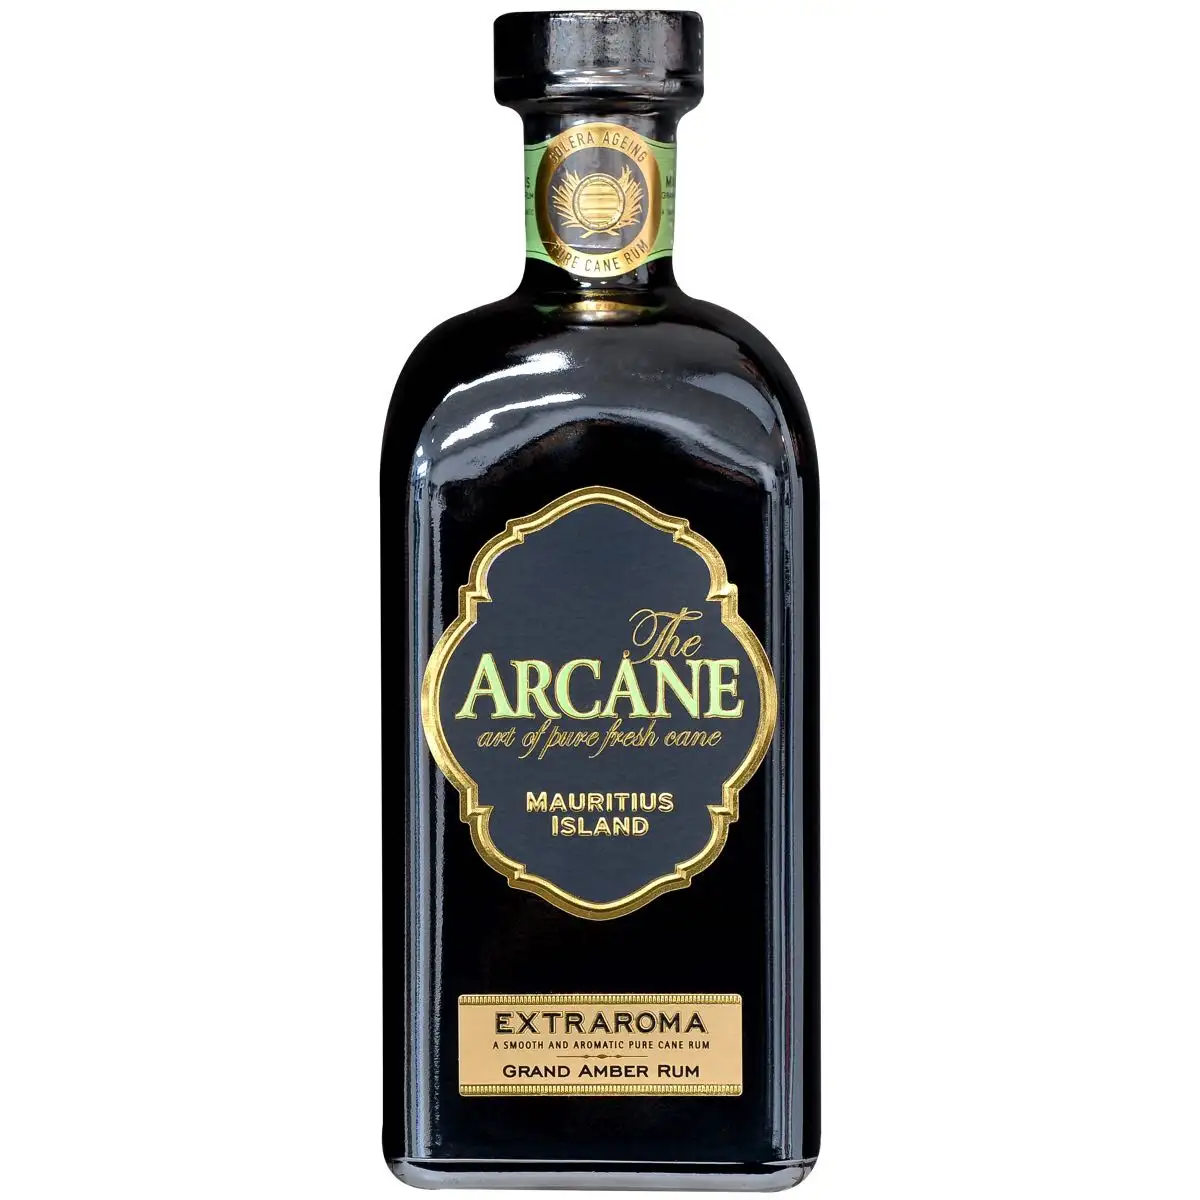 Image of the front of the bottle of the rum Arcane Extraroma Grand Amber